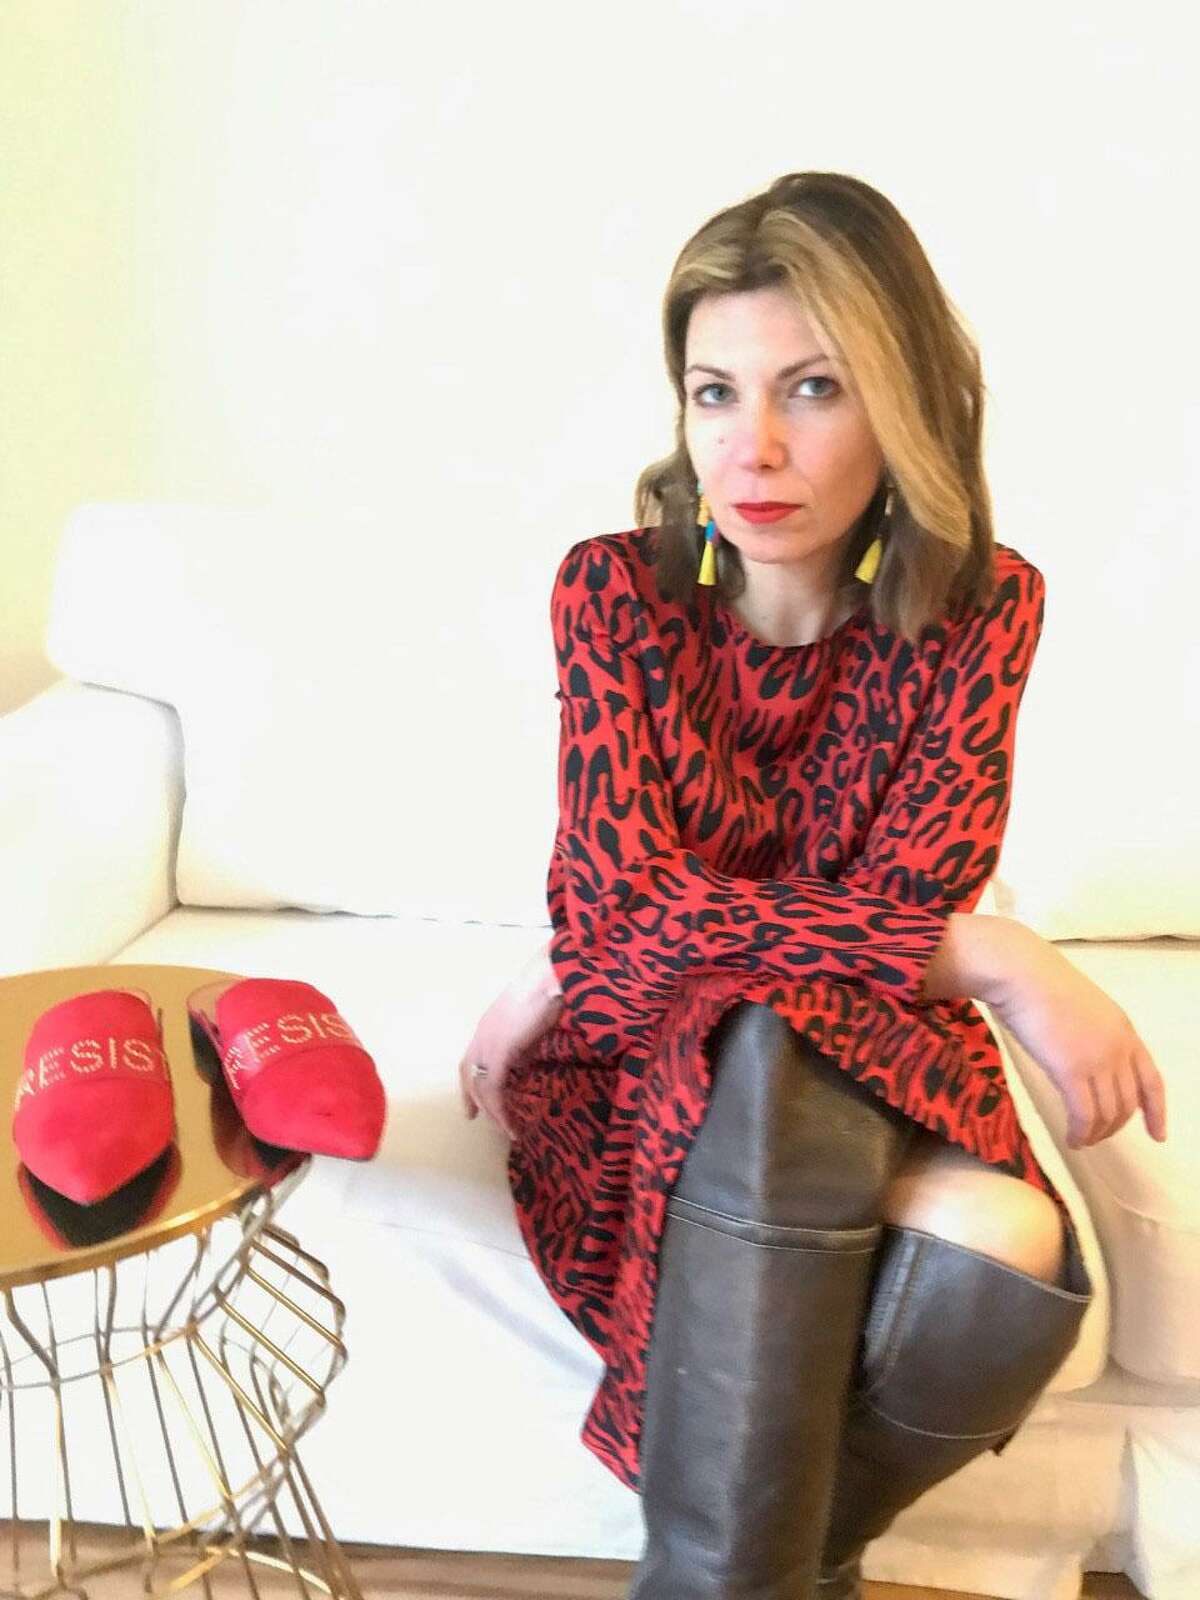 Marina Levine of Greenwich is one of the co-founders of Indivisible Greenwich, and she has launched a line of conversation-starting footwear. IamMoi is a direct-to-consumer line featuring sleek, leather slides and loafers bearing resistance slogans, such as “Resist,” “We Rise” and “Vote.”